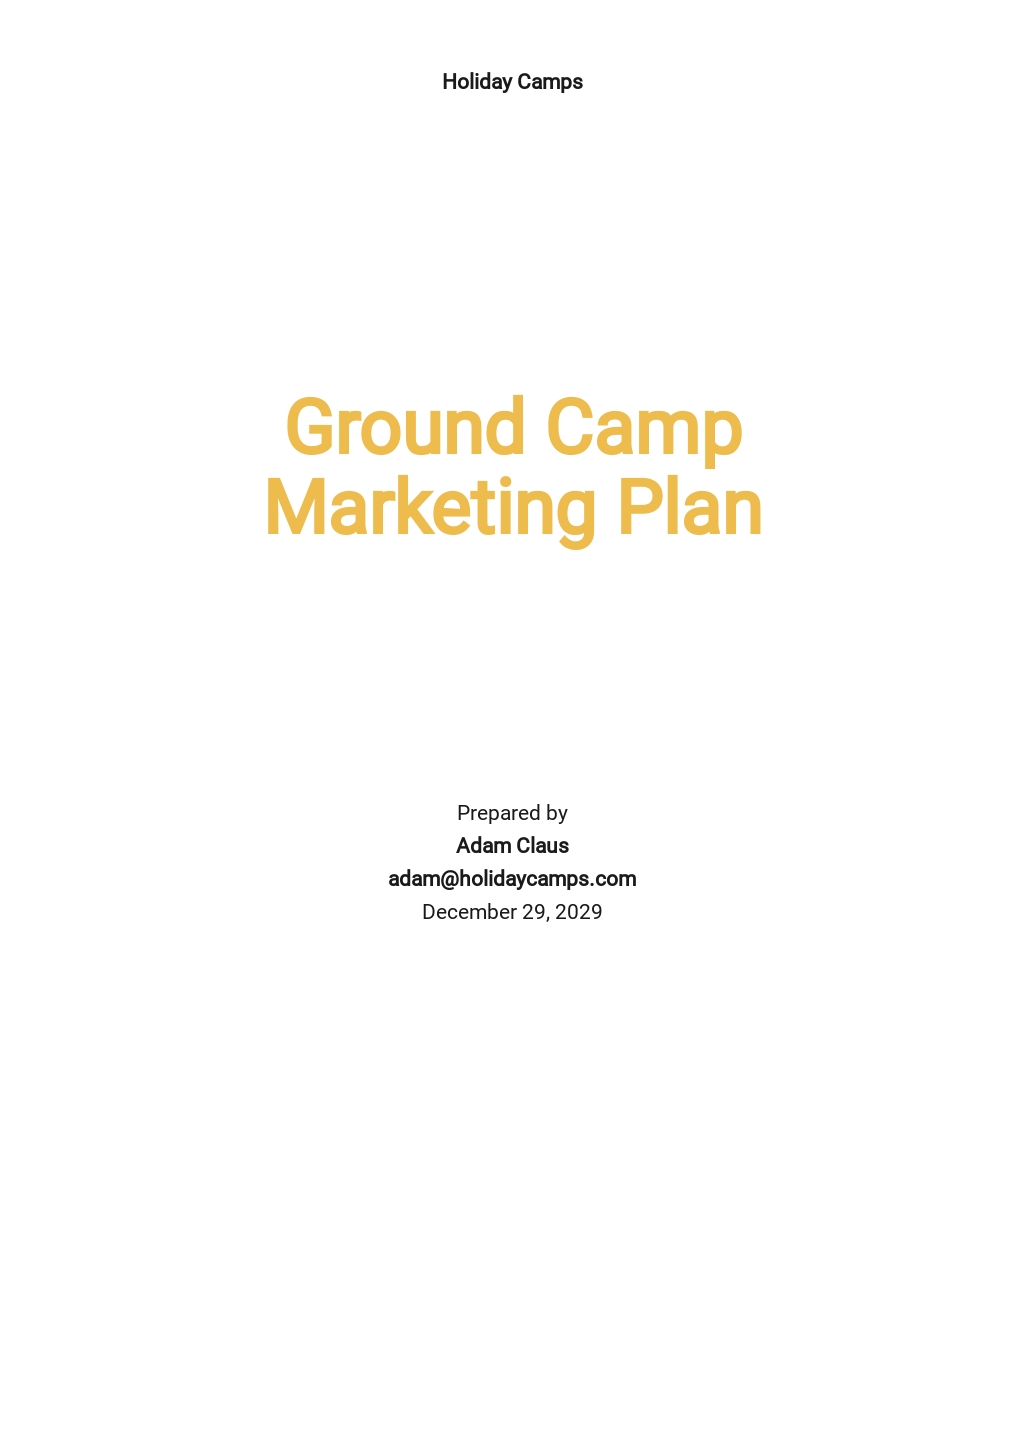 Camping or Camp Ground Marketing Plan Template.jpe